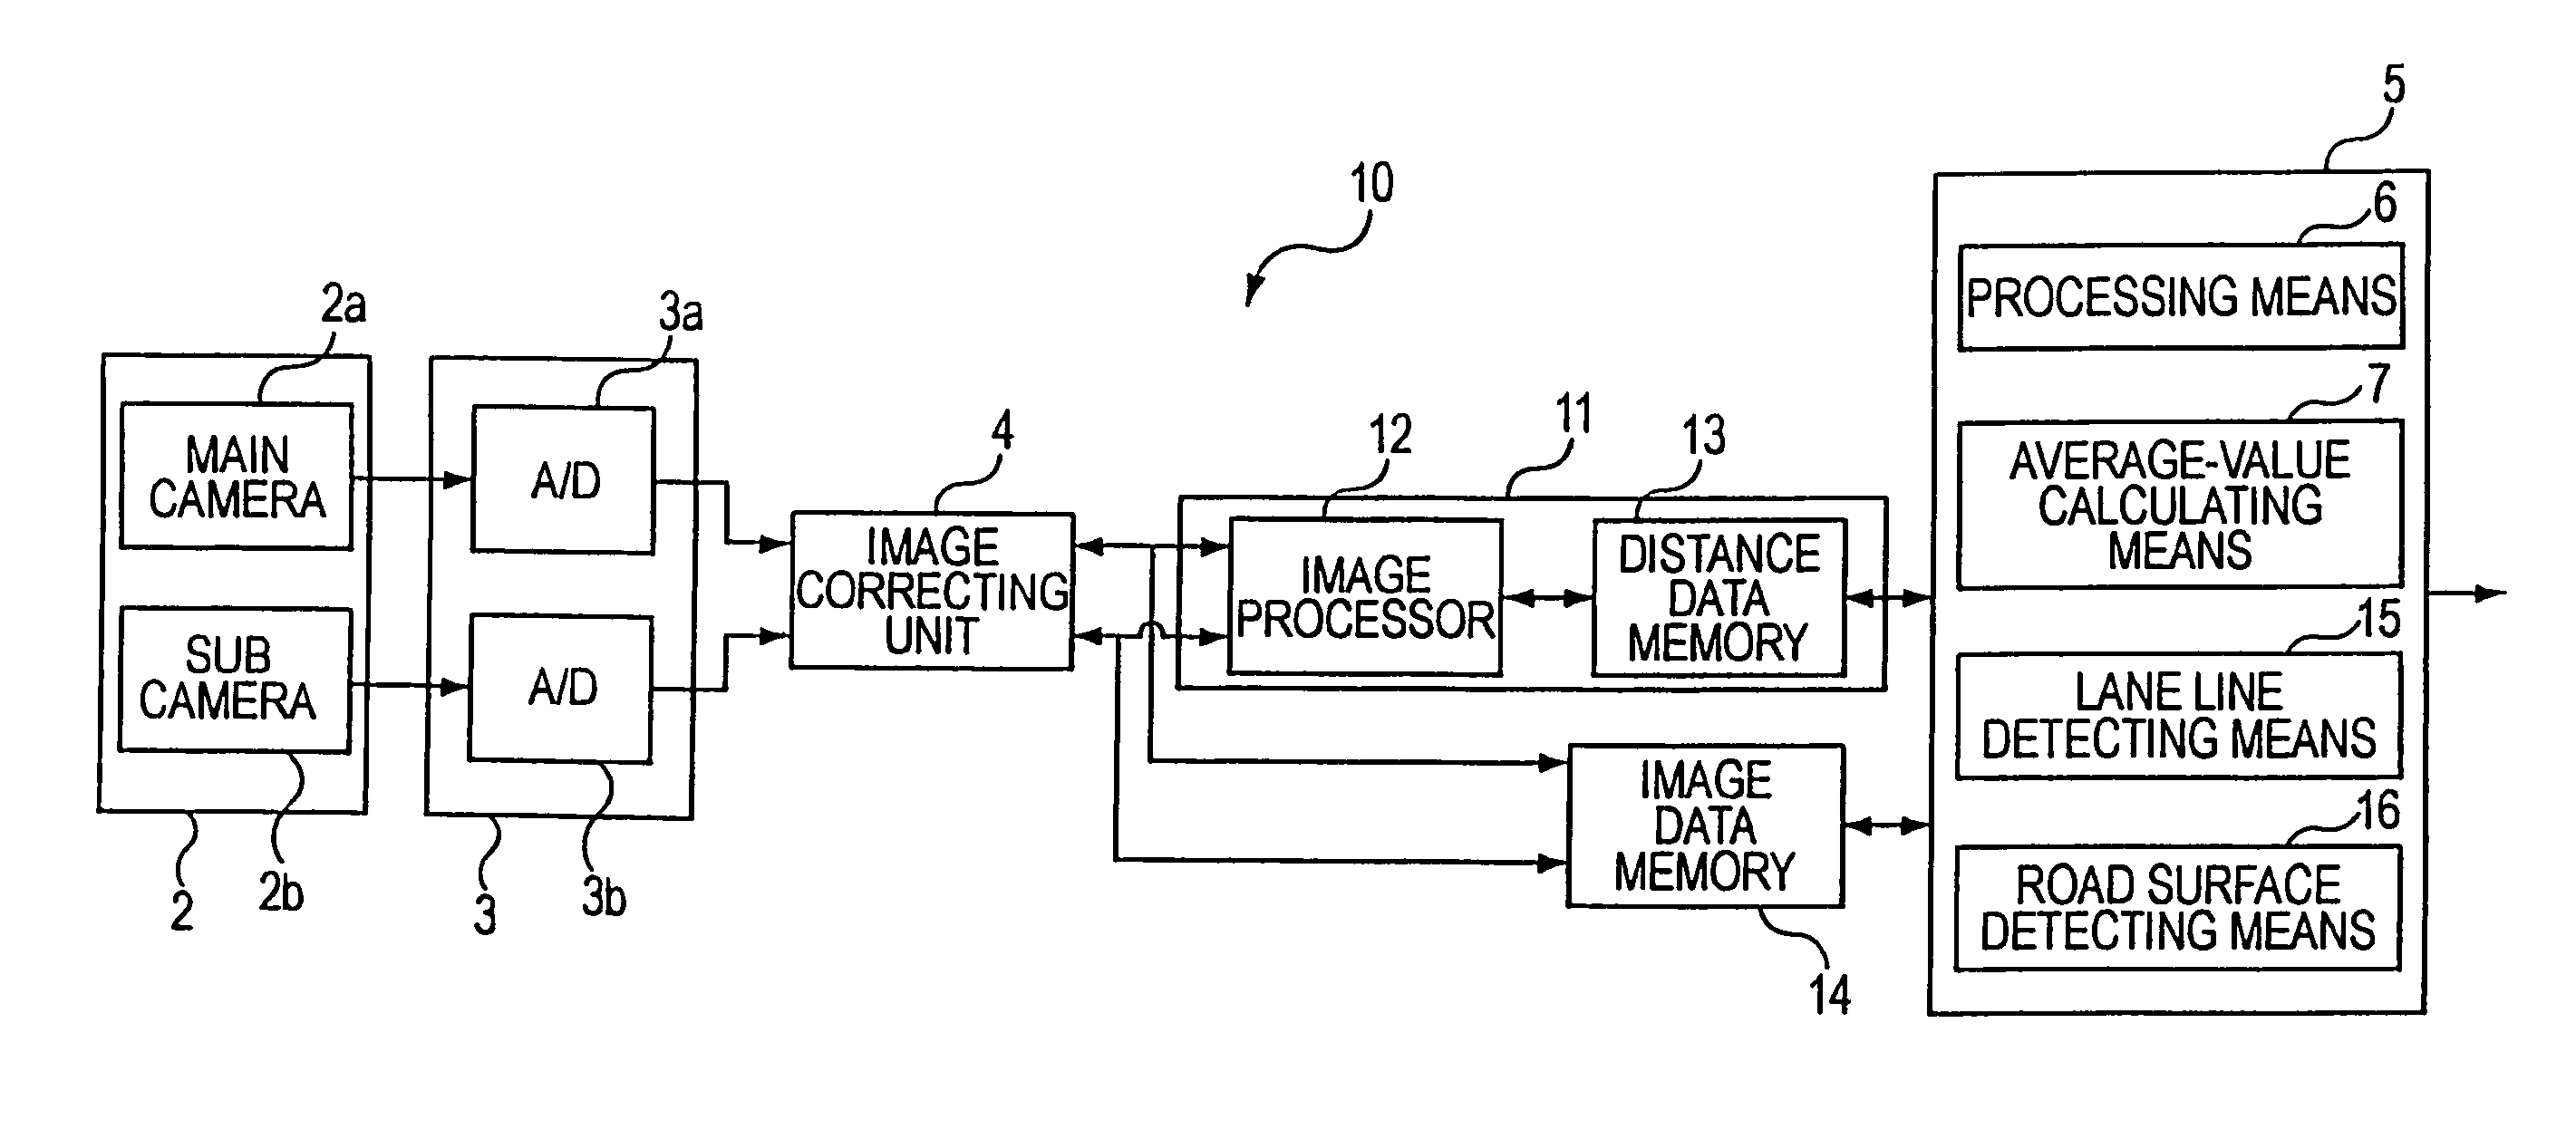 Image processing device for dividing an image into a plurality of regions